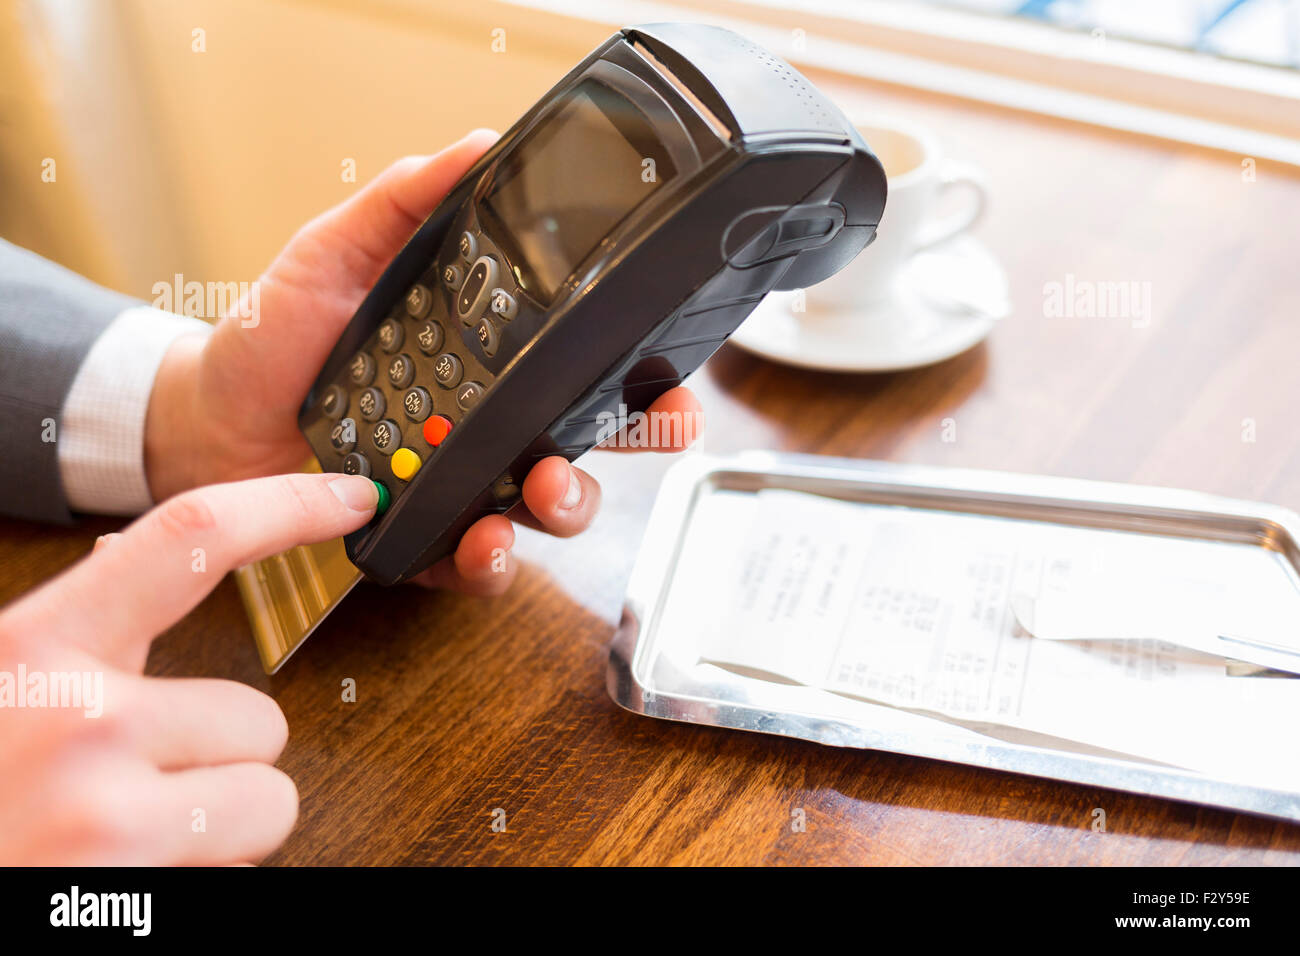 Man hand with credit card swipe through terminal for sale, in restaurant. code keyboard Stock Photo